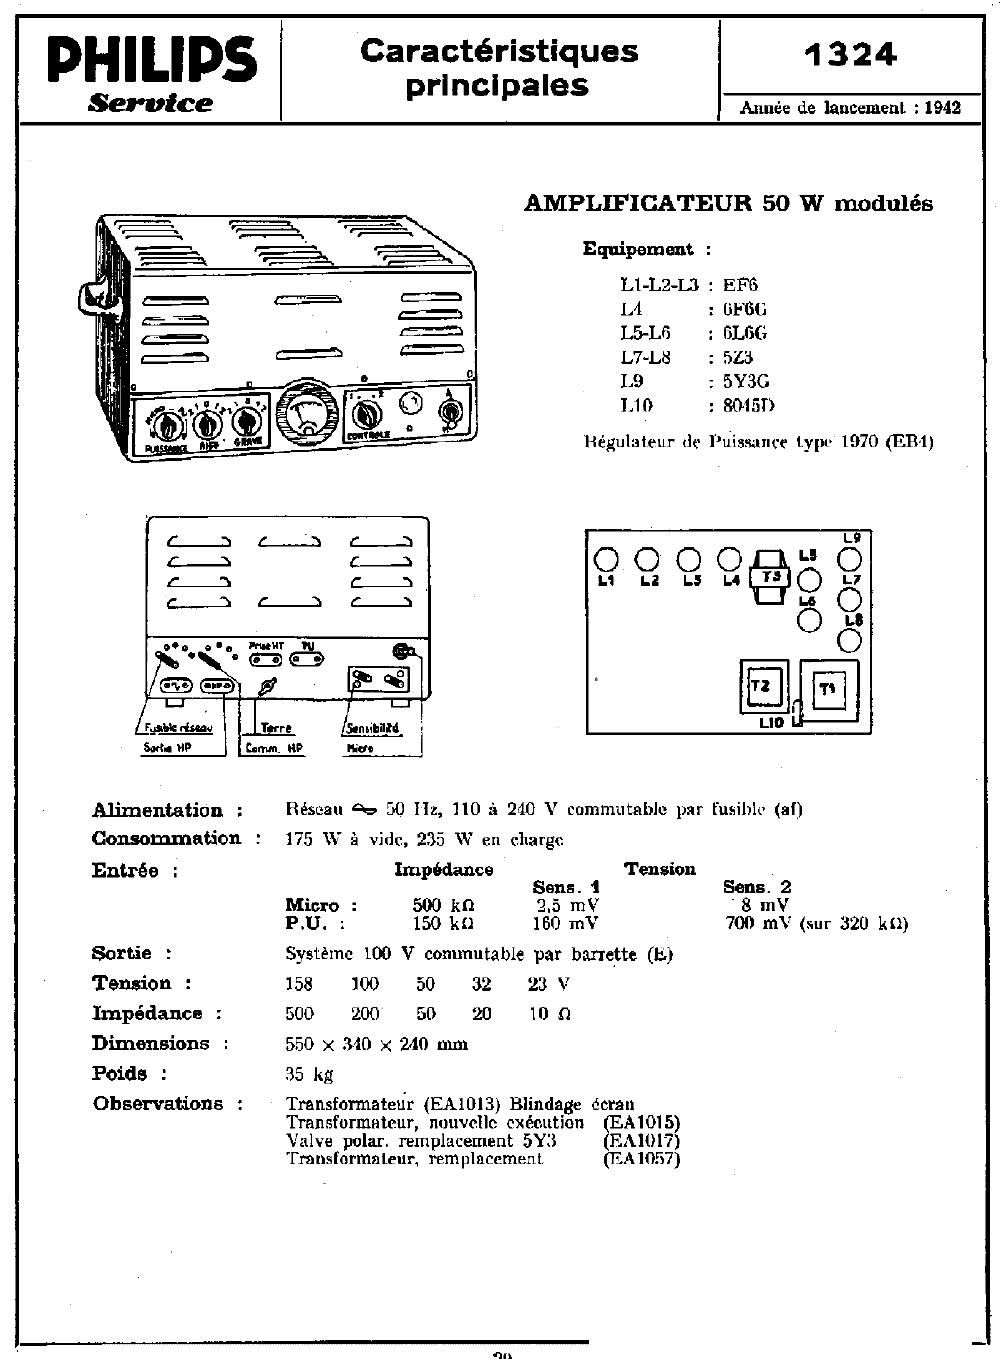 philips 1324 service manual